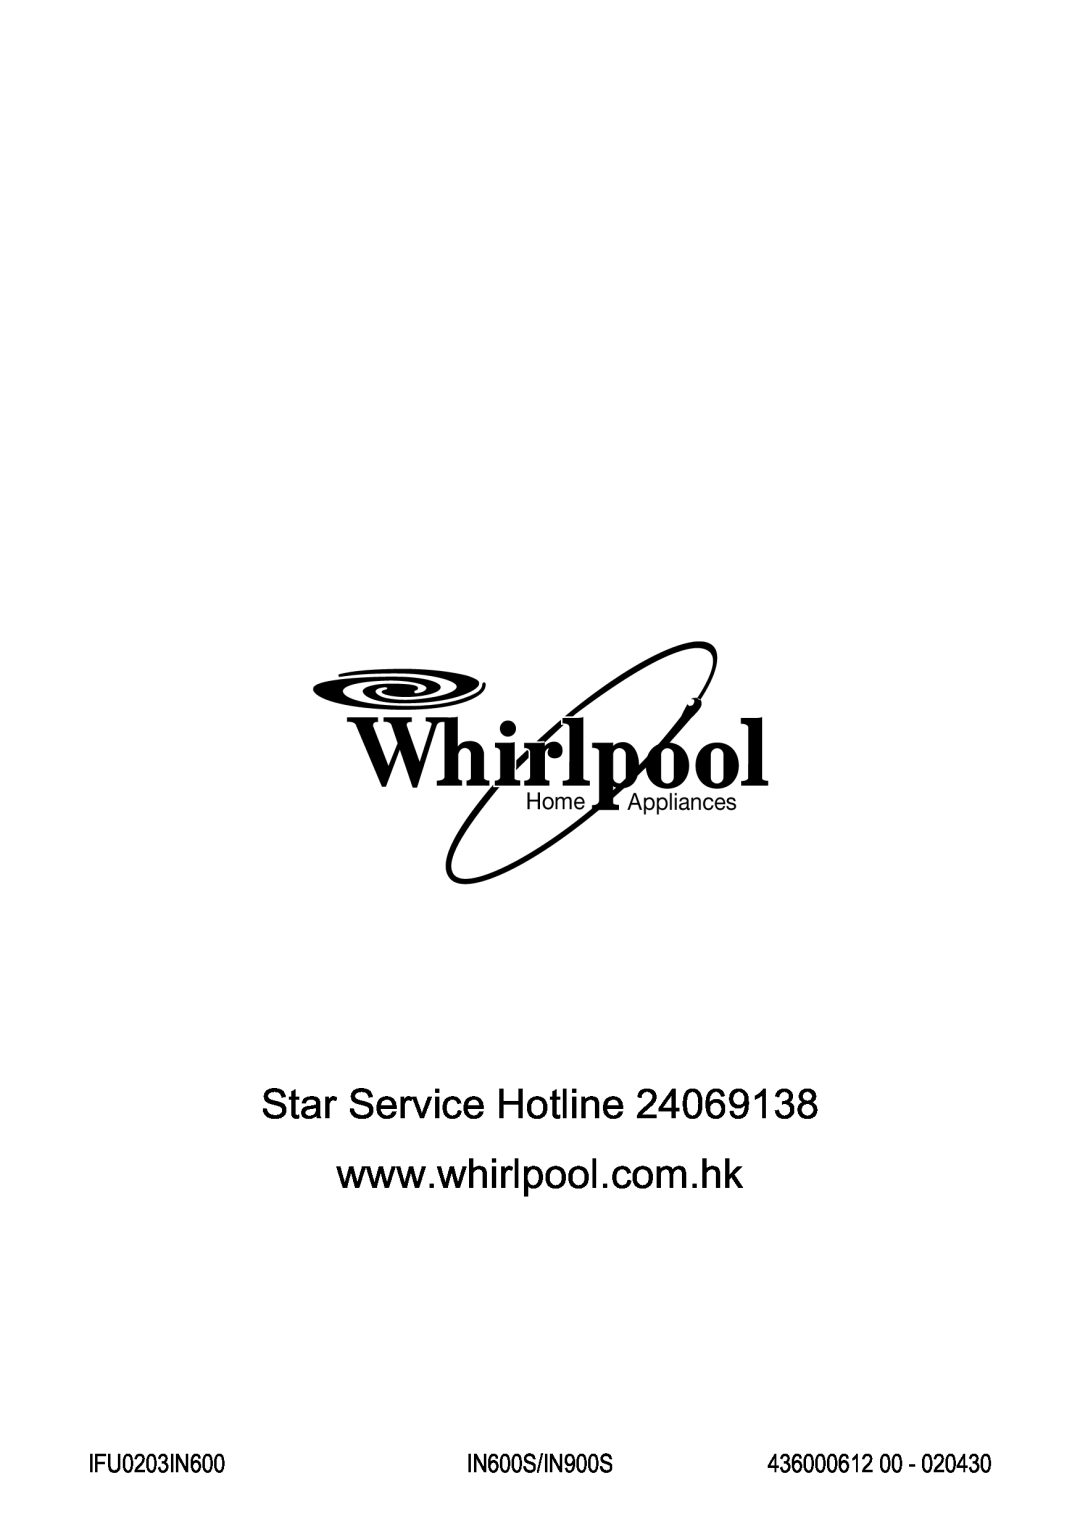 Whirlpool instruction manual IFU0203IN600, IN600S/IN900S, 436000612 00, Star Service Hotline, Home Appliances 